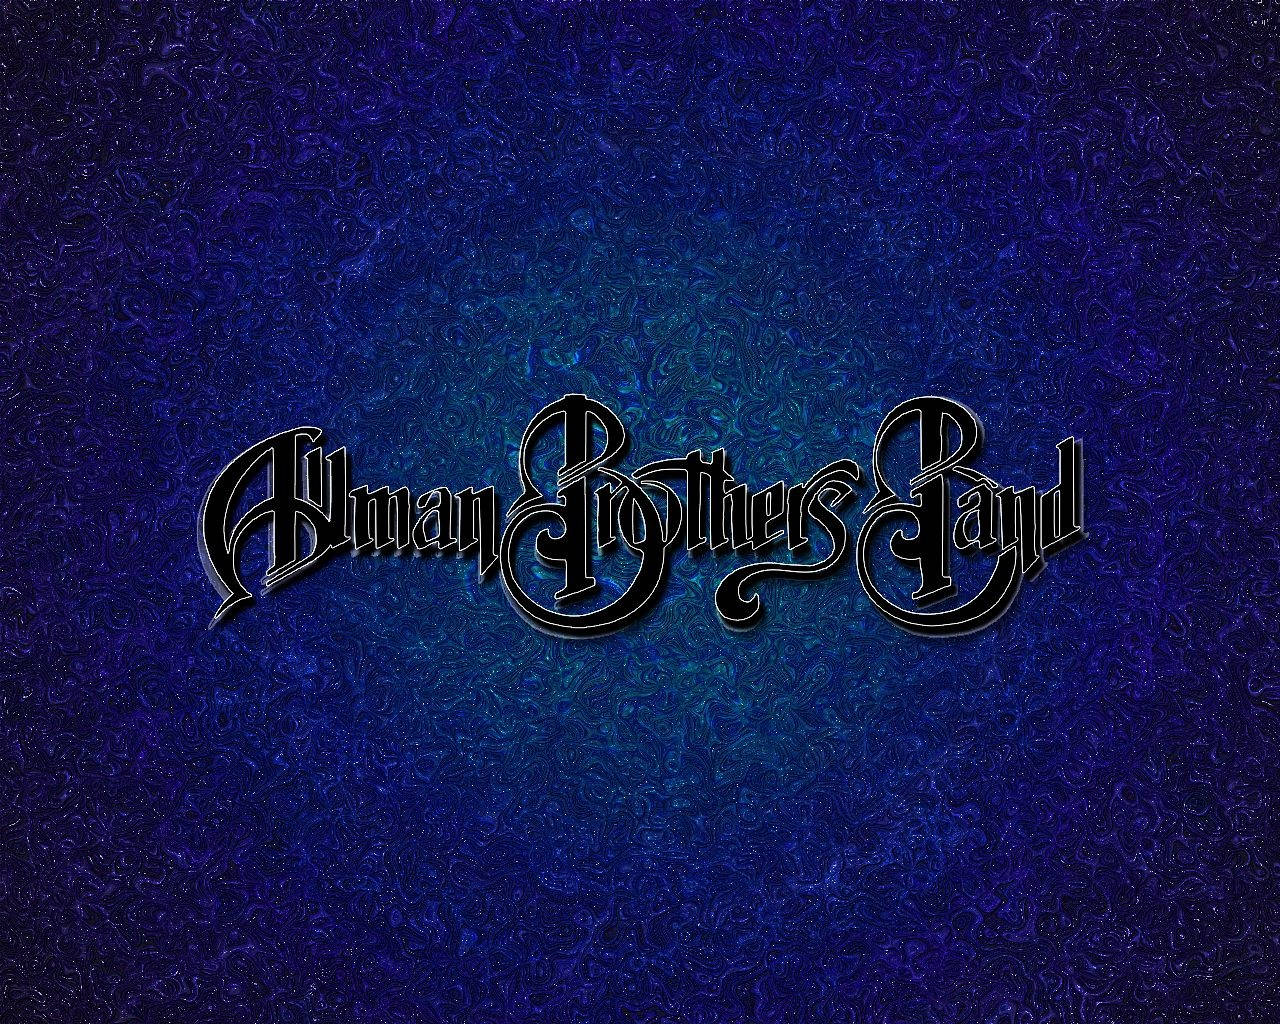 Allman Brothers Band Cover Photo Wallpaper